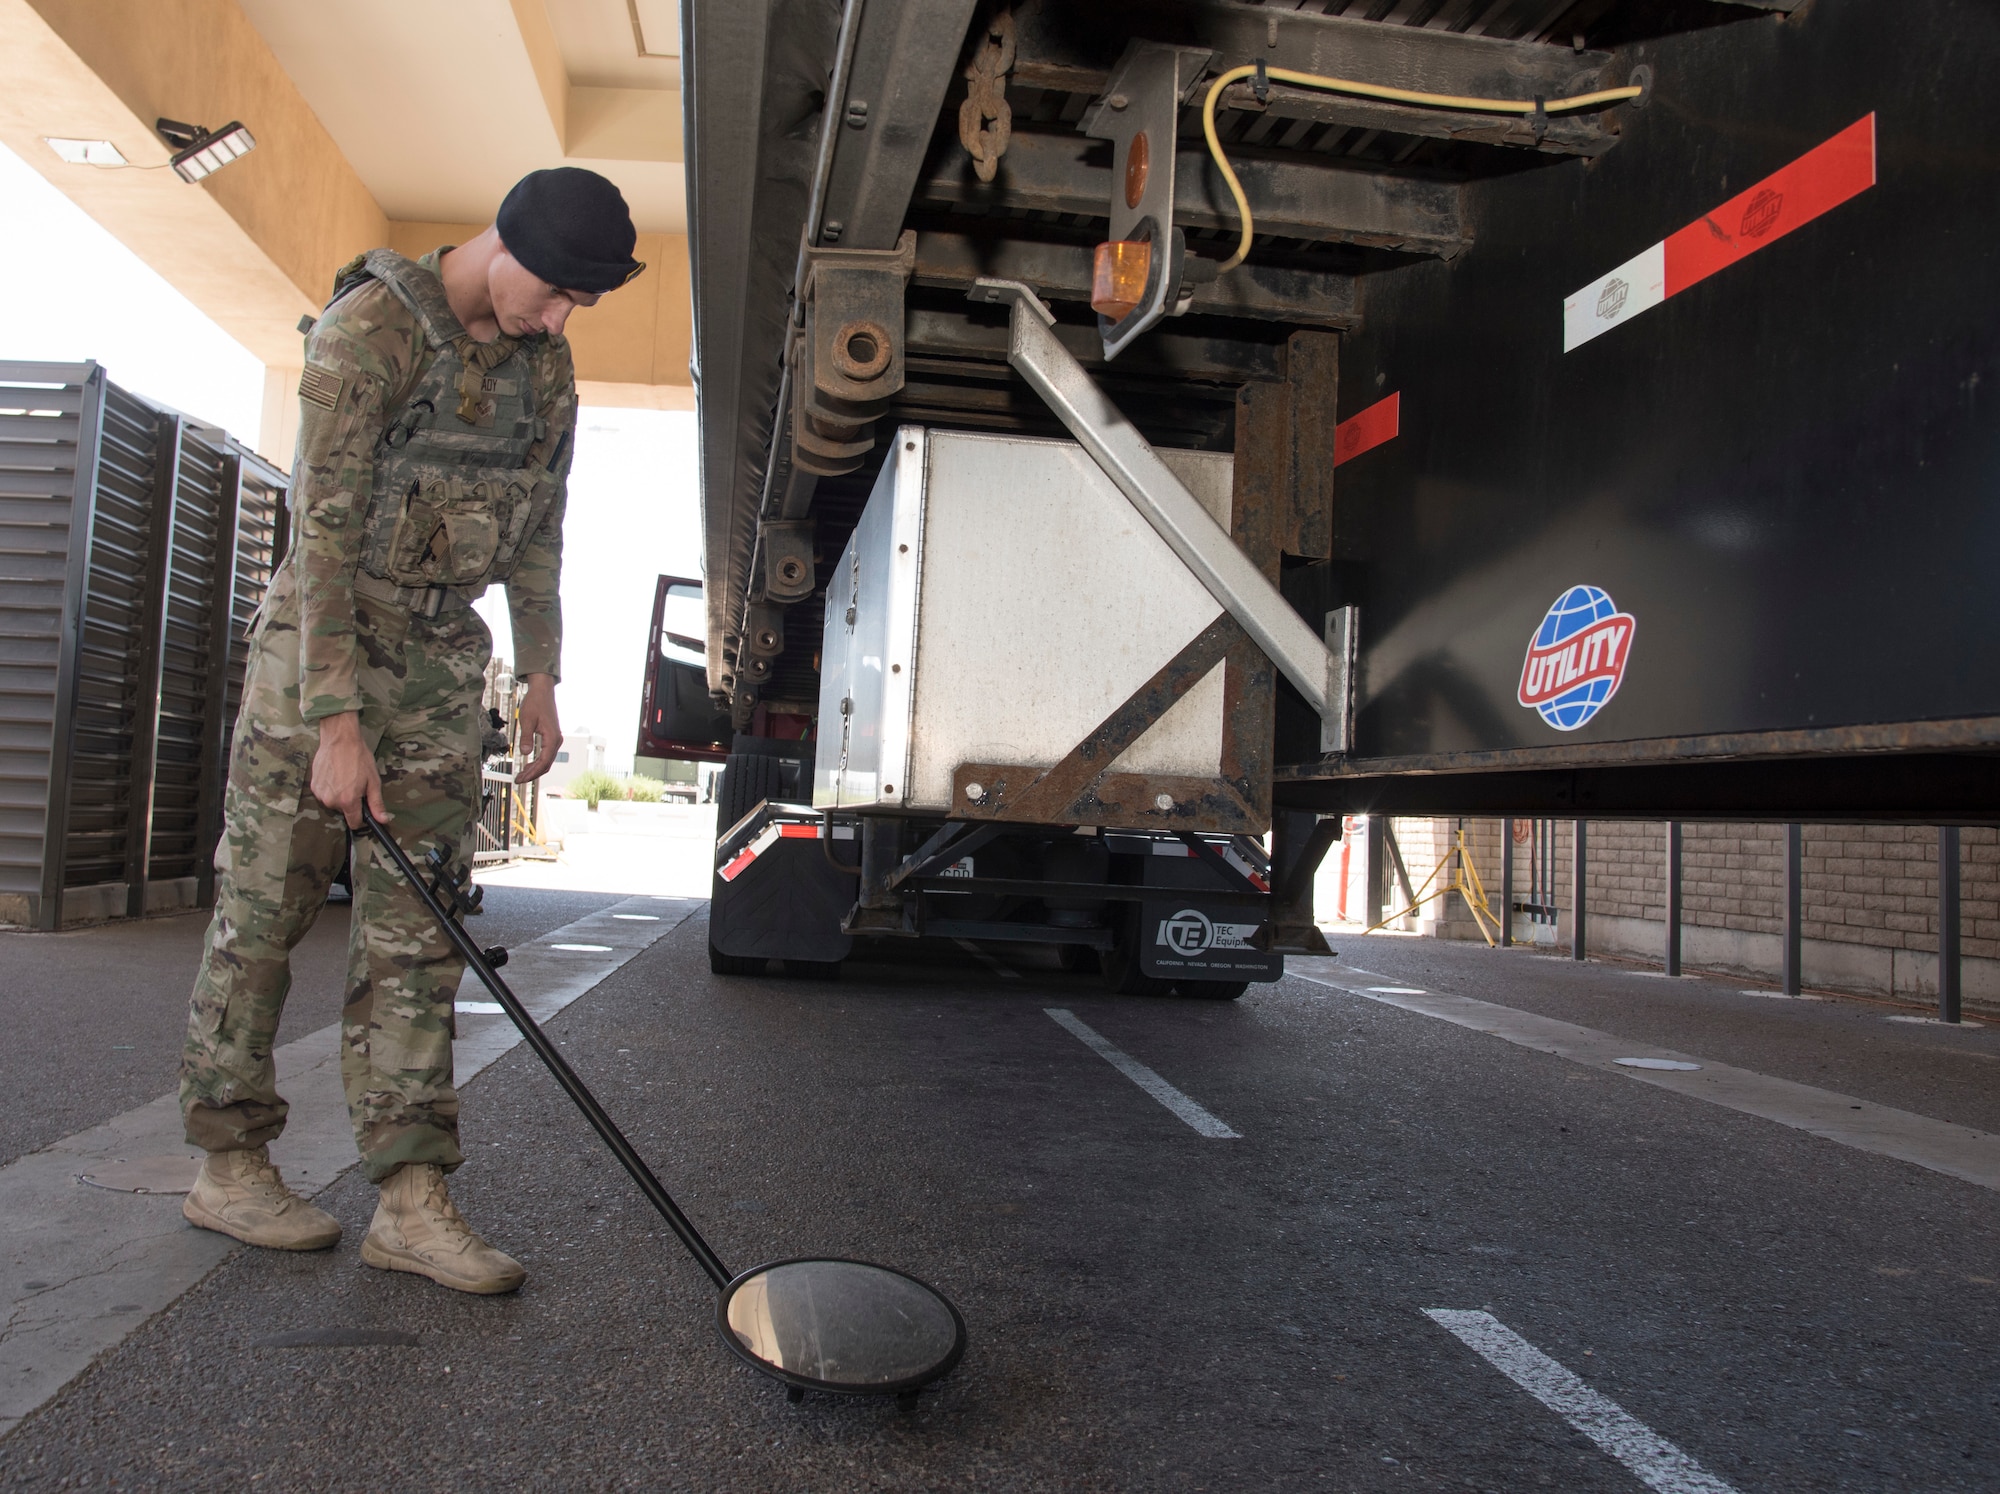 Senior Airman Jaden Cady, 56th Security Forces Squadron law enforcement controller, uses a mirror to inspect underneath a truck that is passing through the South Gate search pit, May 31, 2019, at Luke Air Force Base, Ariz.